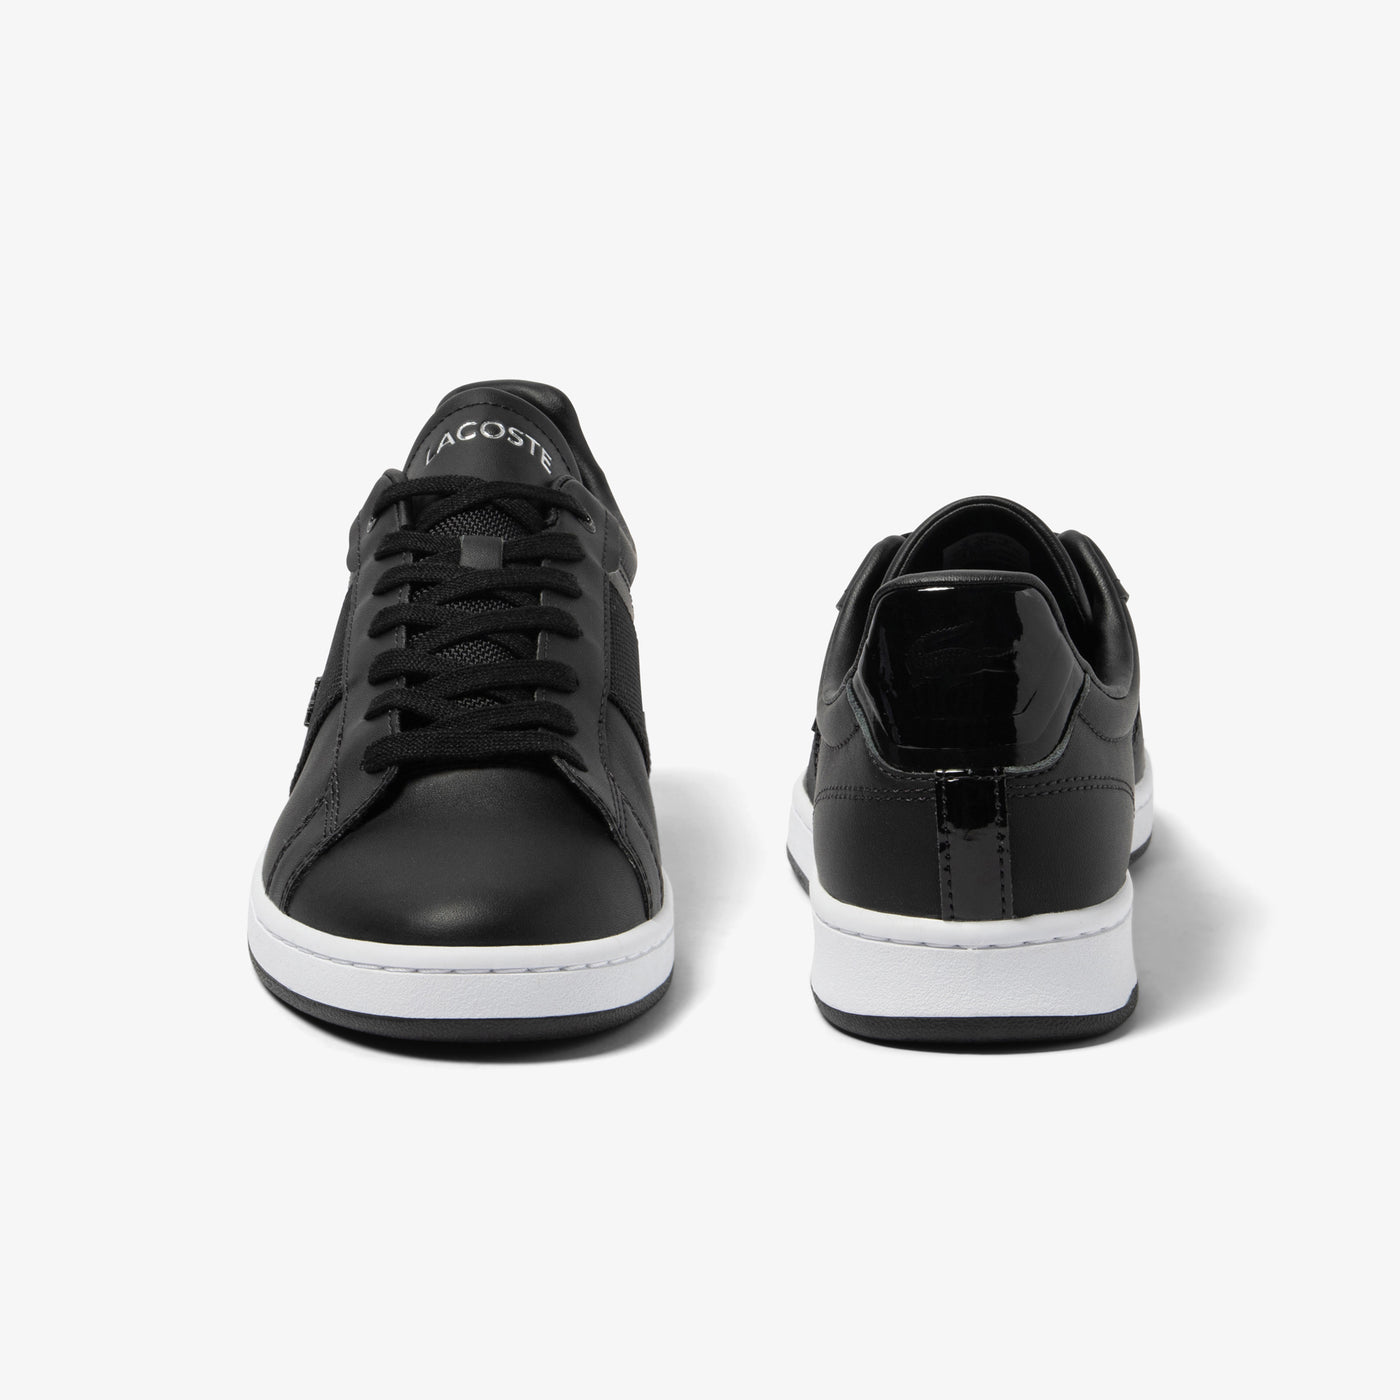 Men's Lacoste Carnaby Pro Leather Premium Trainers - 45SMA0046312